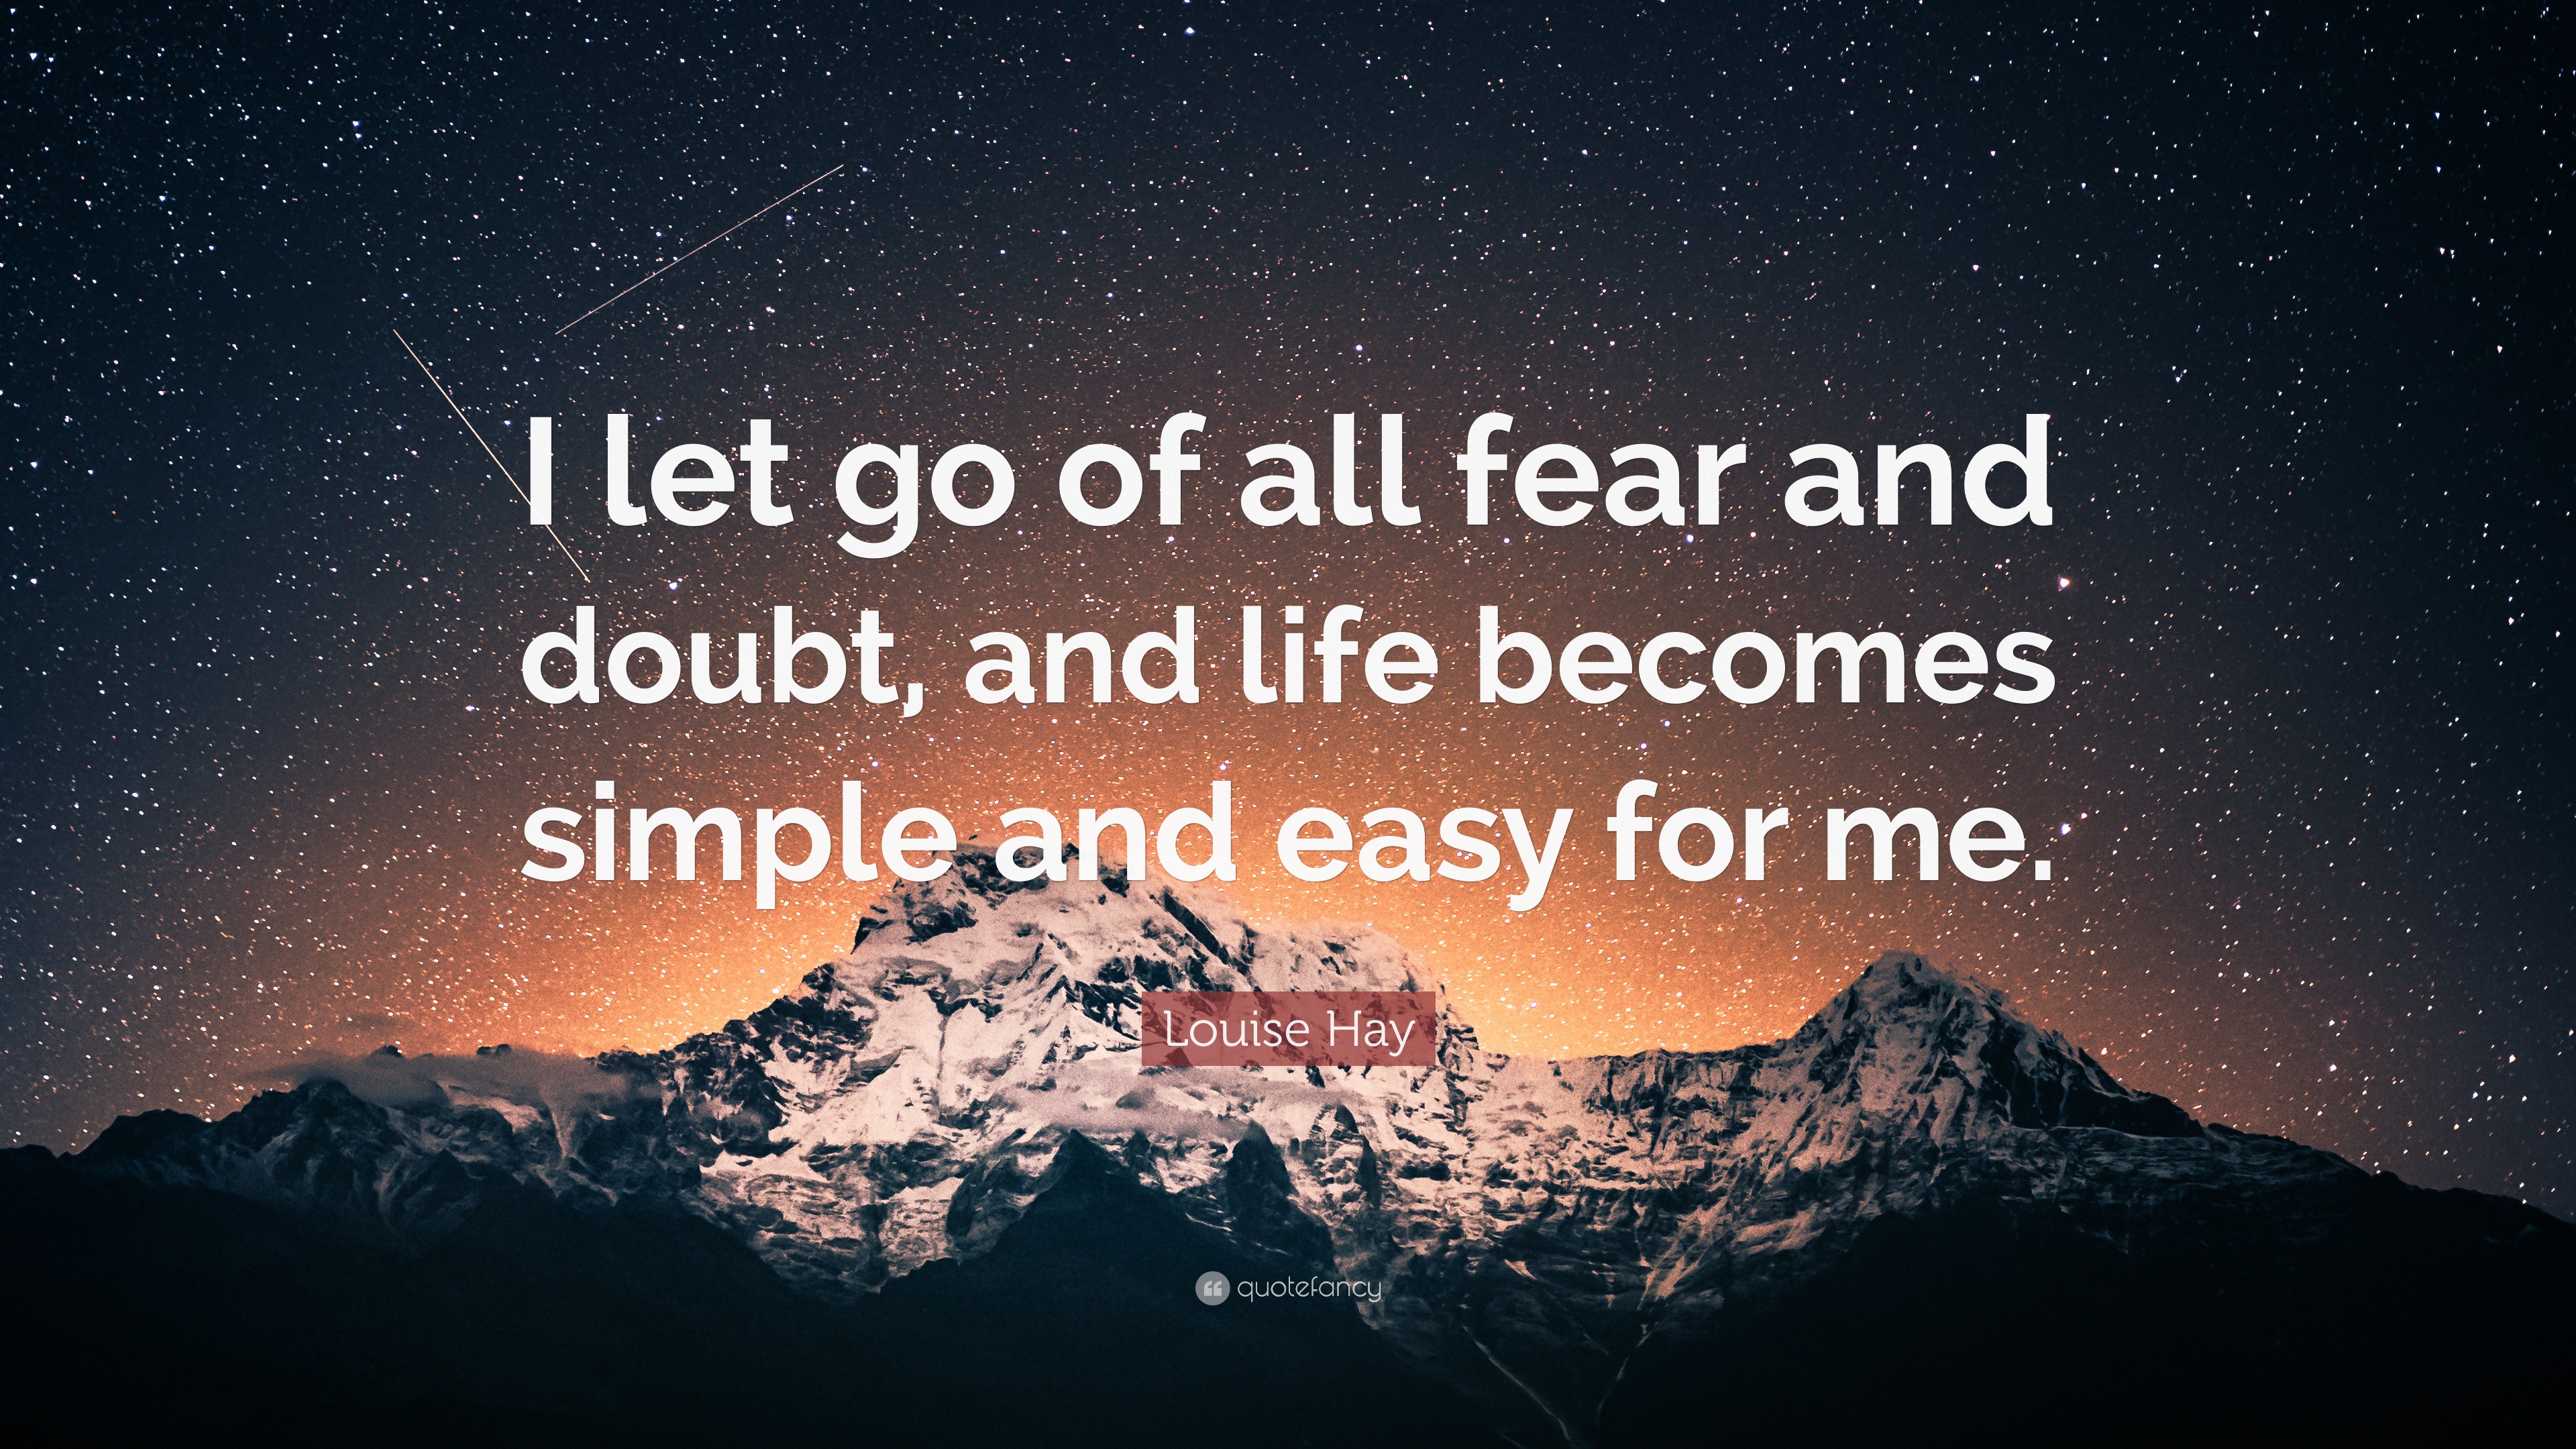 Louise Hay Quote: “I let go of all fear and doubt, and life becomes simple  and